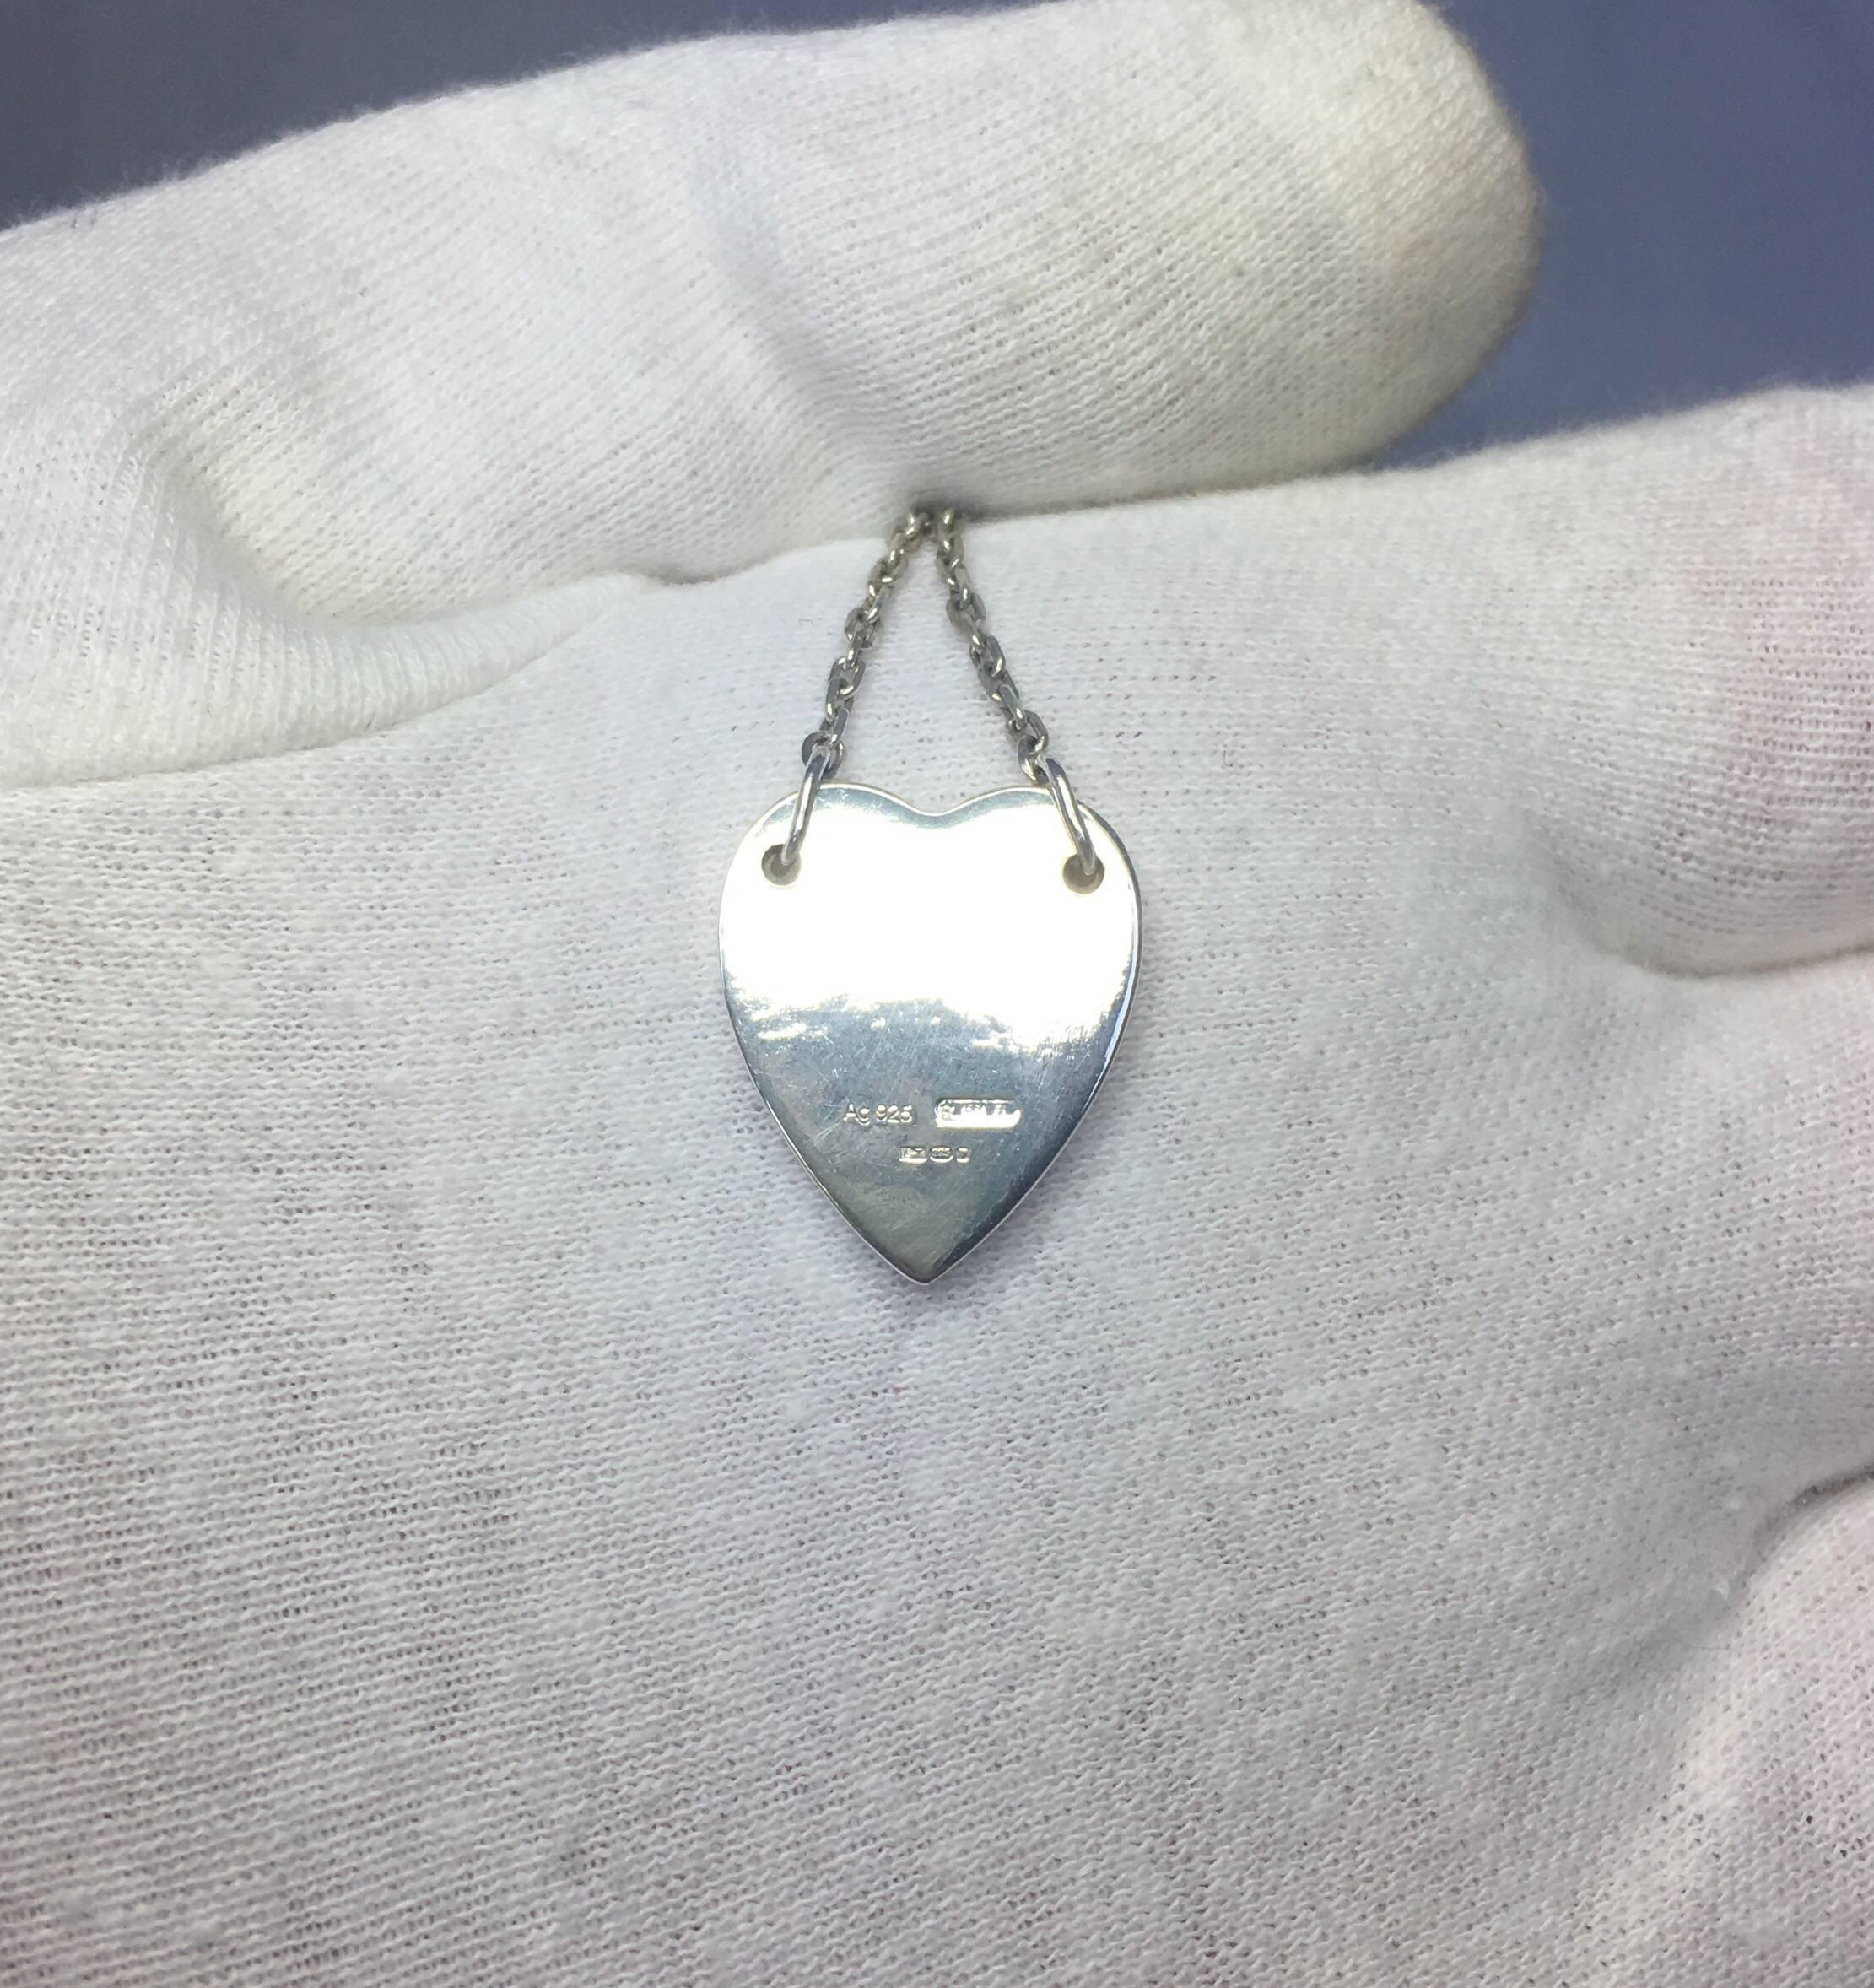 Women's or Men's Gucci Sterling Silver Necklace Heart Pendant